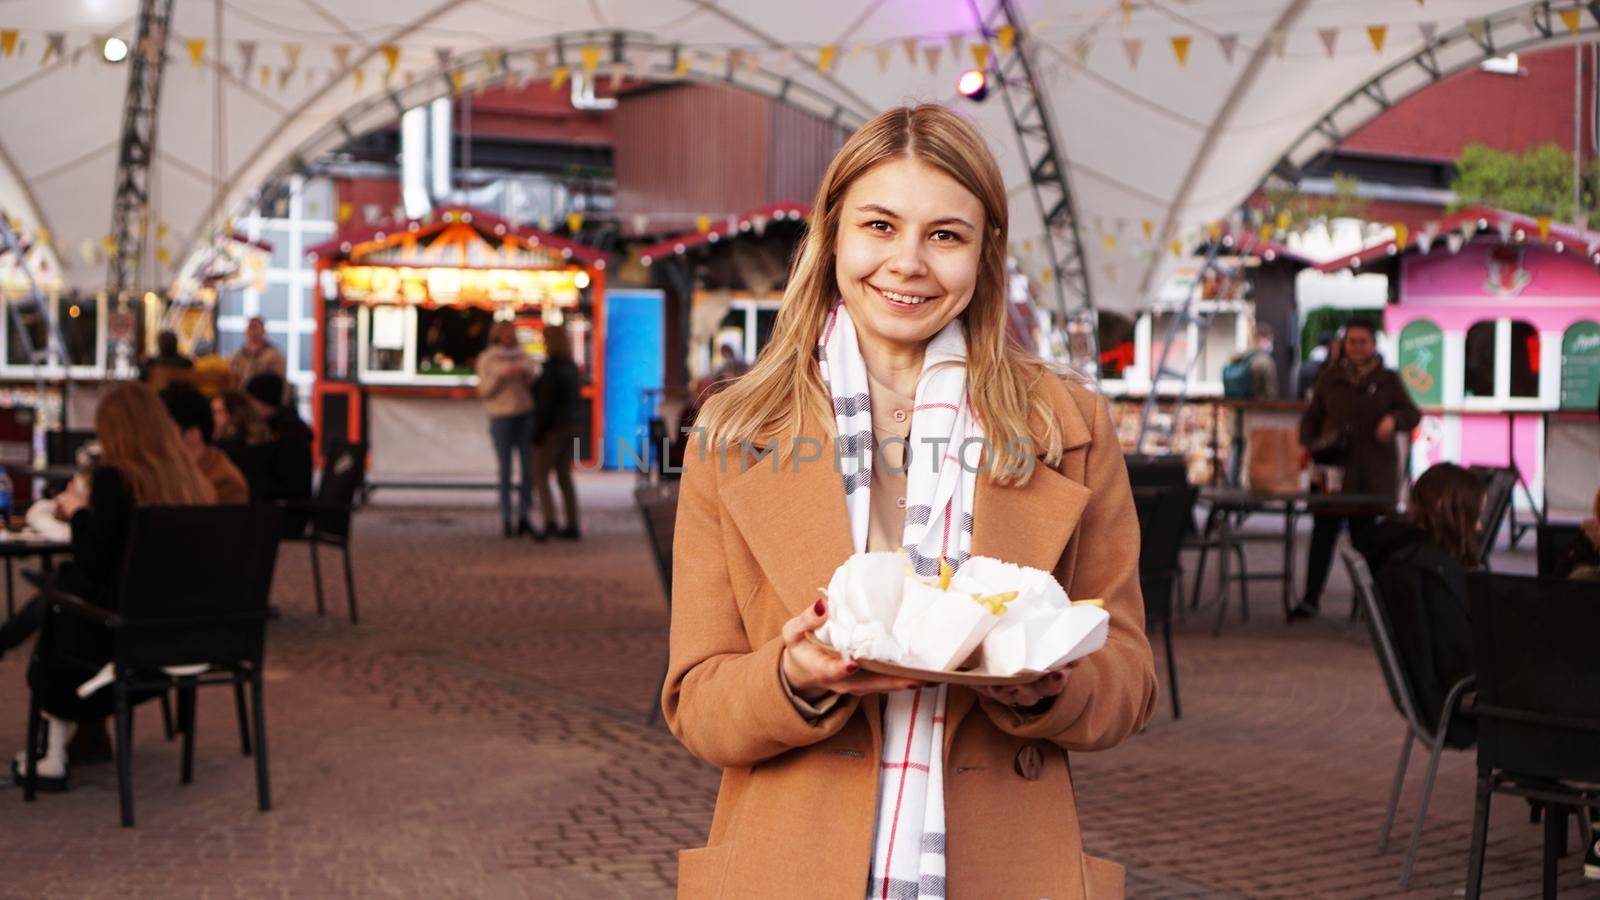 Woman at the food court with food trucks. The blonde has bought some street food and goes to her table. She smiles and looks at the camera